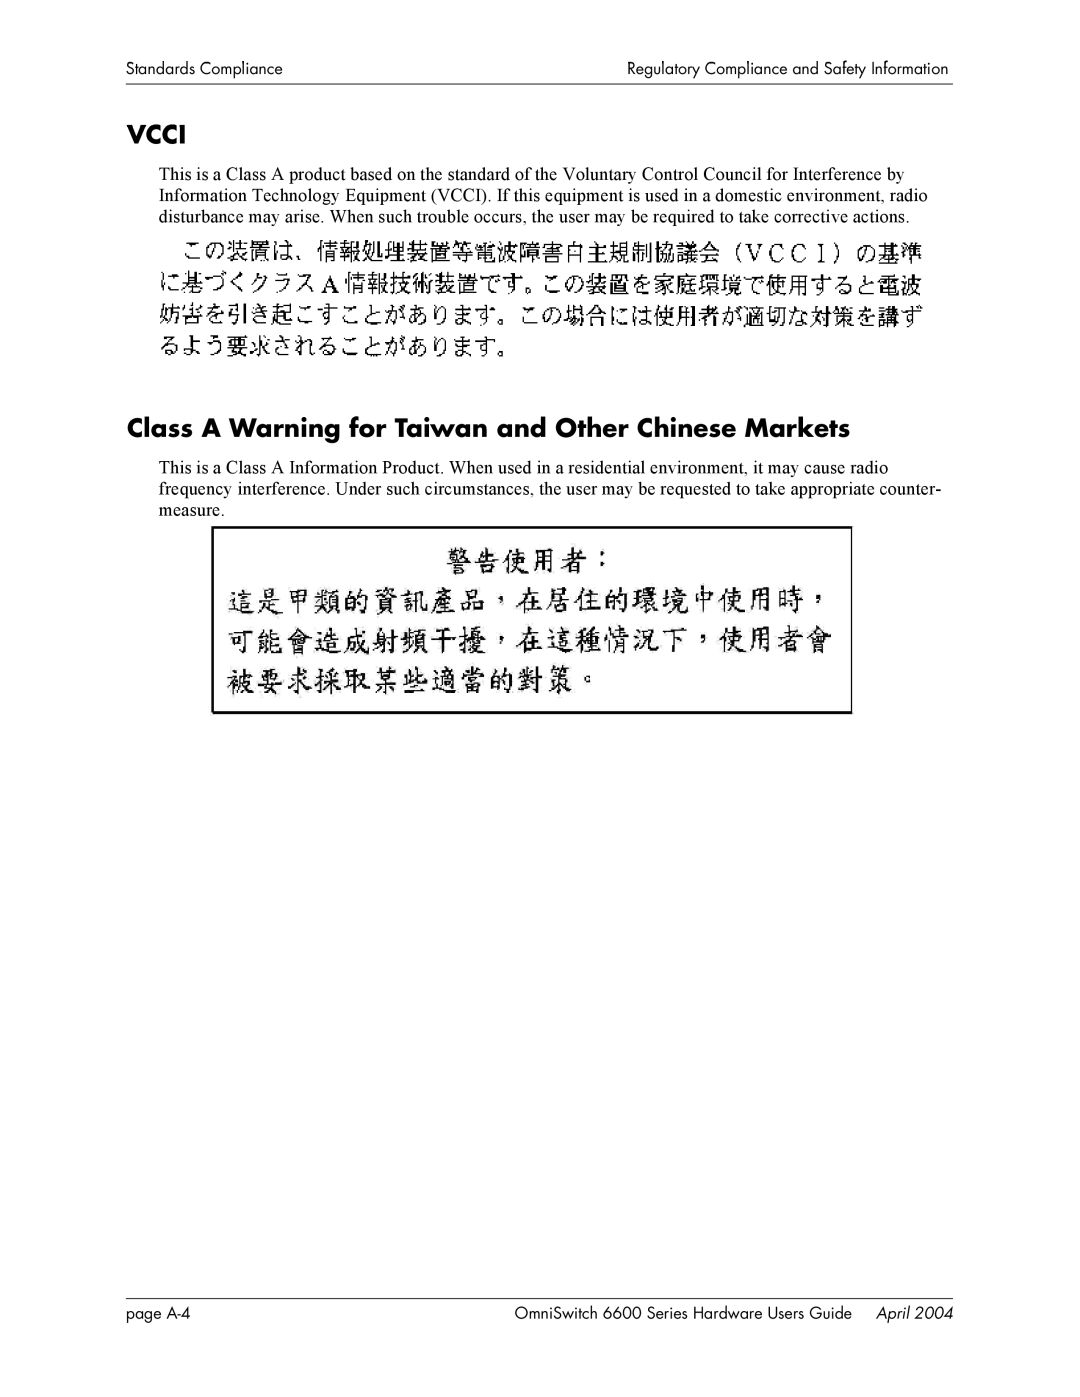 Alcatel-Lucent 6624, 6648, 6600 Series manual Vcci, Class A Warning for Taiwan and Other Chinese Markets 